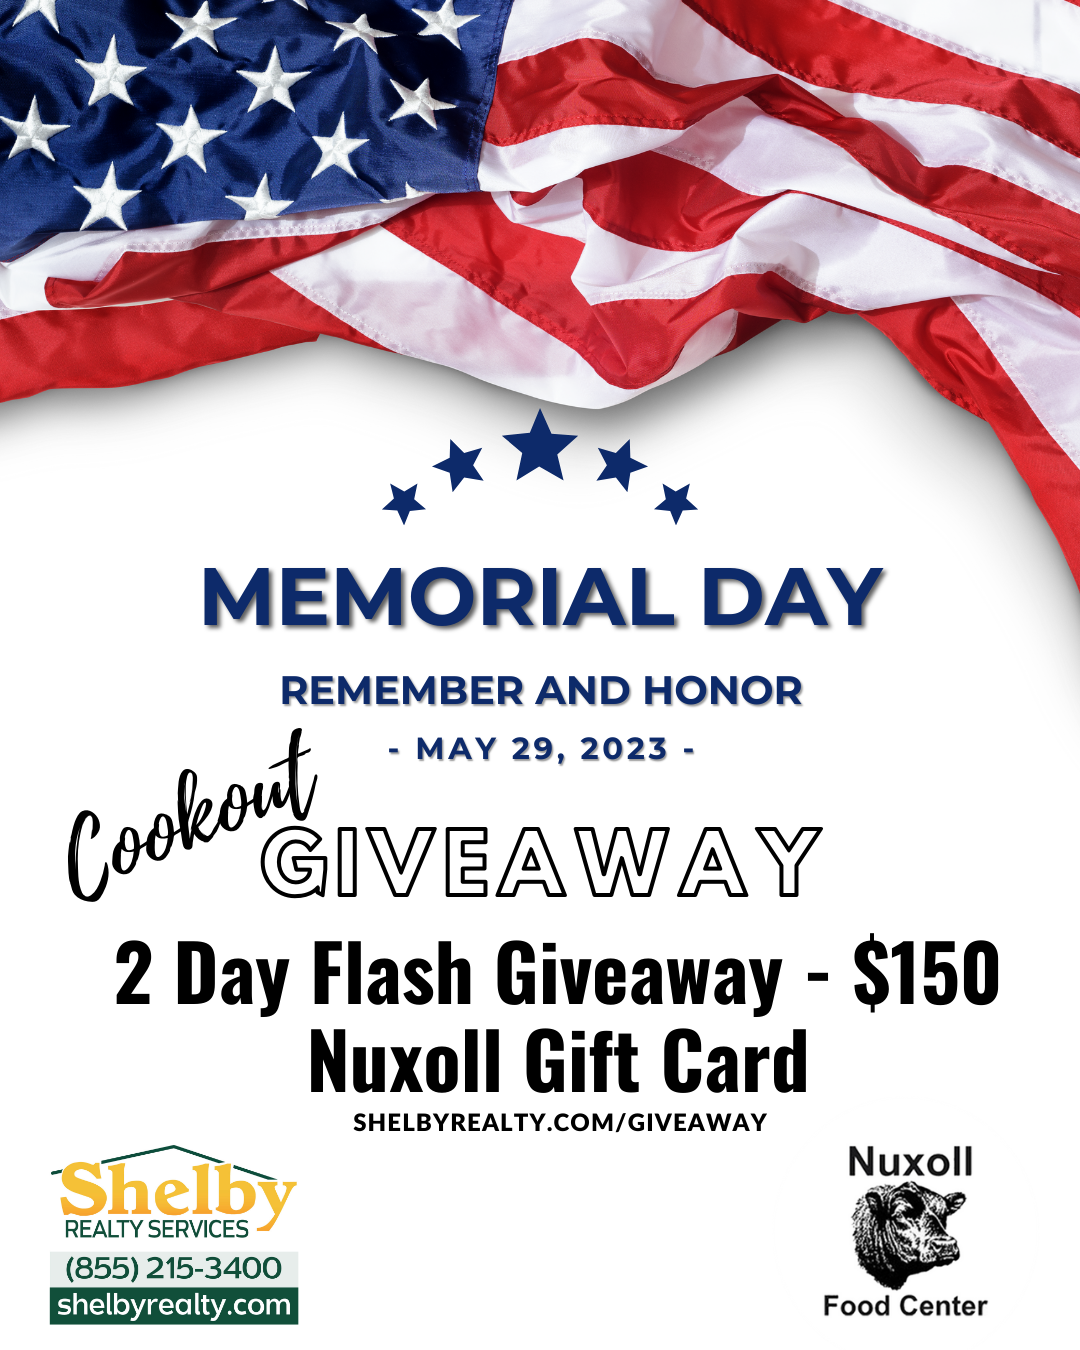 Shelby Realty Services Nuxoll Memorial Day $150 Gift Card Giveaway